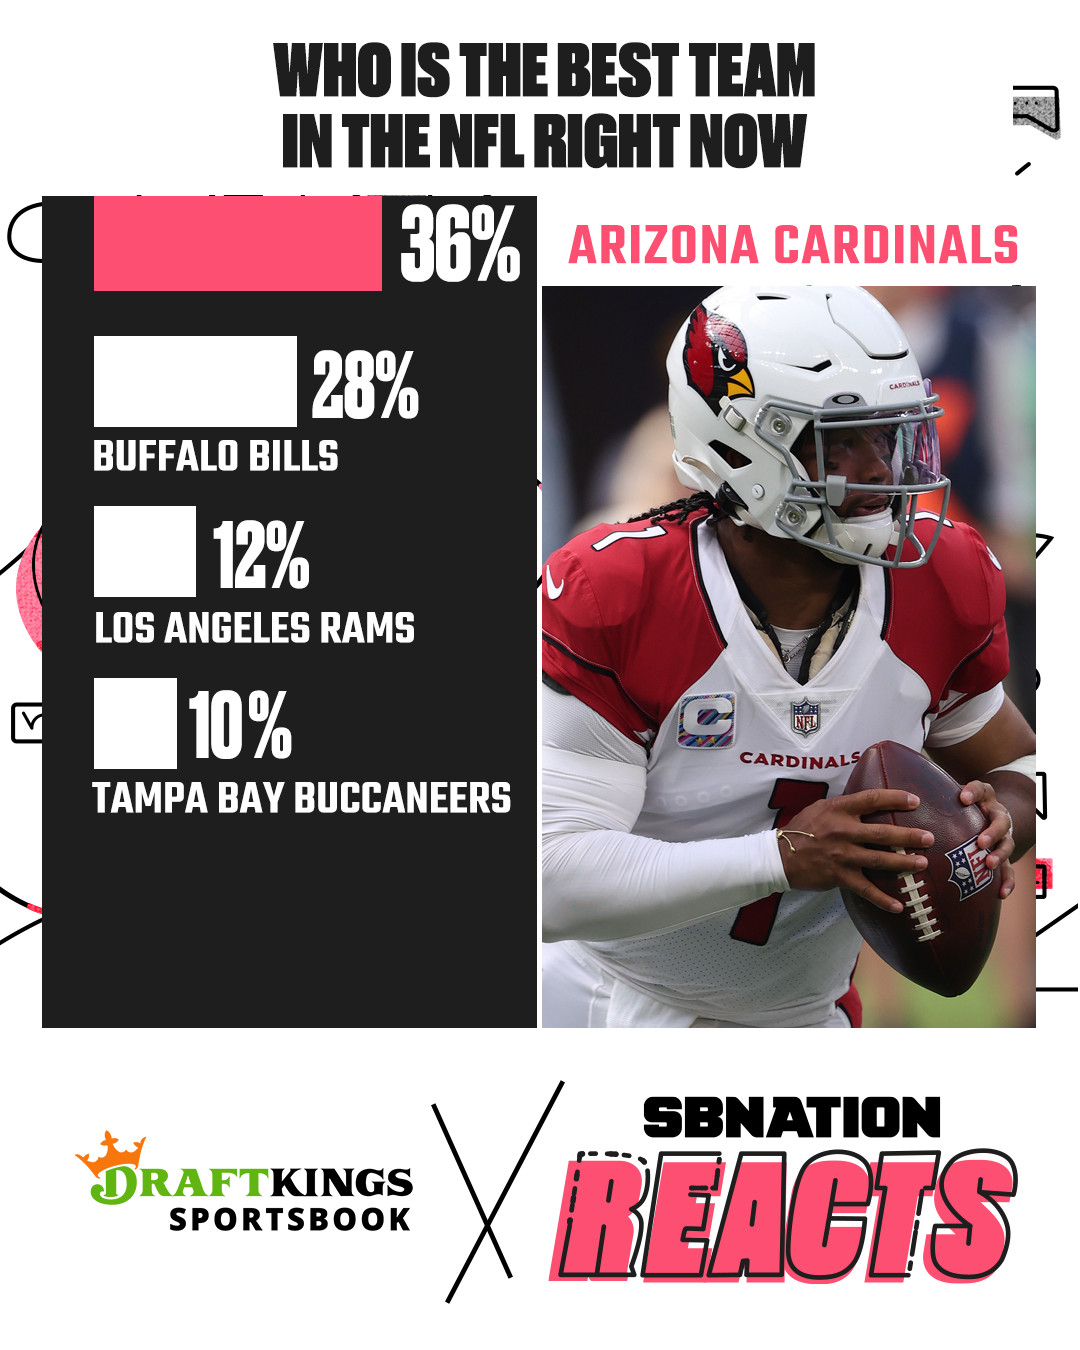 Arizona Cardinals are the best team in the NFL according to SB Nation  Reacts - Revenge of the Birds